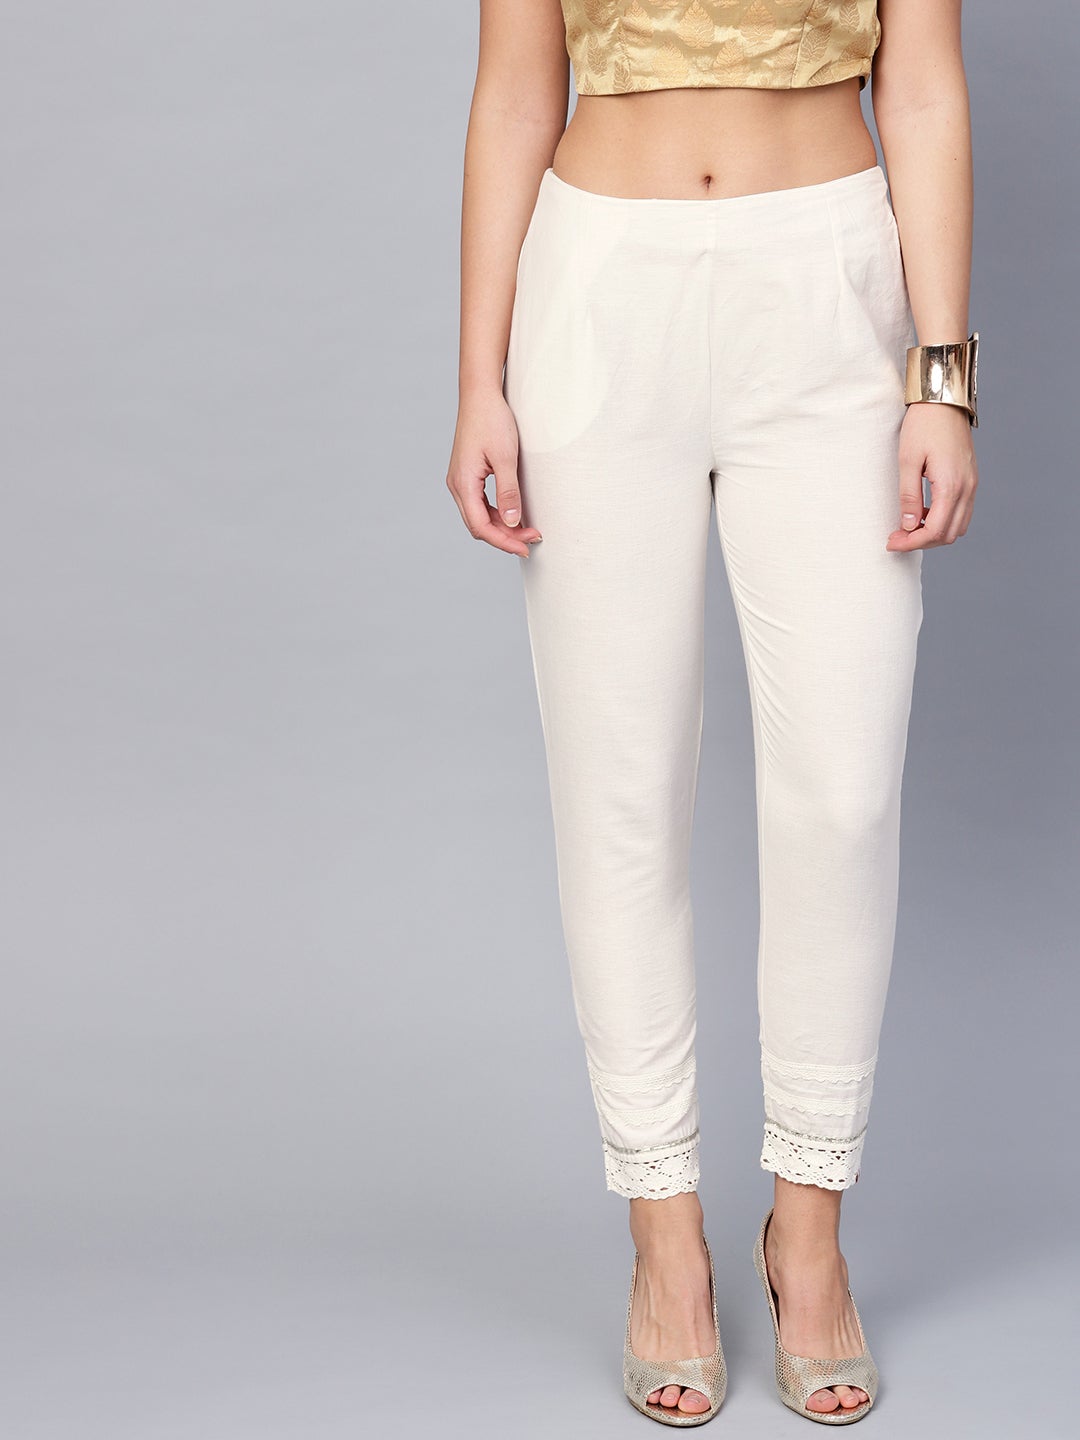 Buy OffWhite Cotton Solid Cigarette Pants Online in India  Juniper Fashion